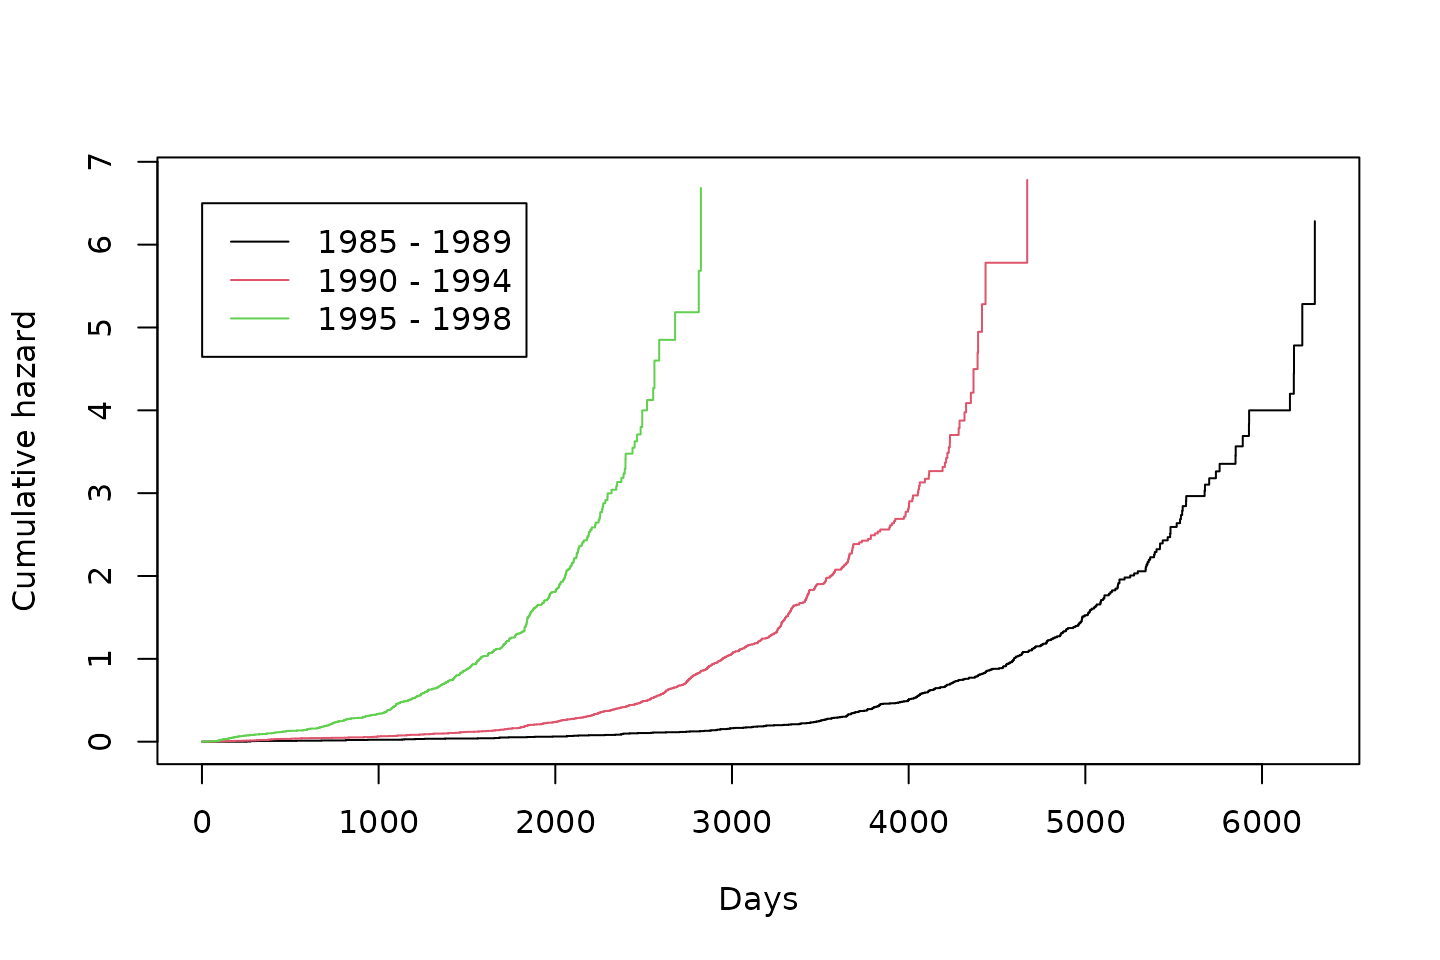 Figure 1: Cumulative hazard calculated within subgroups defined by year of transplant